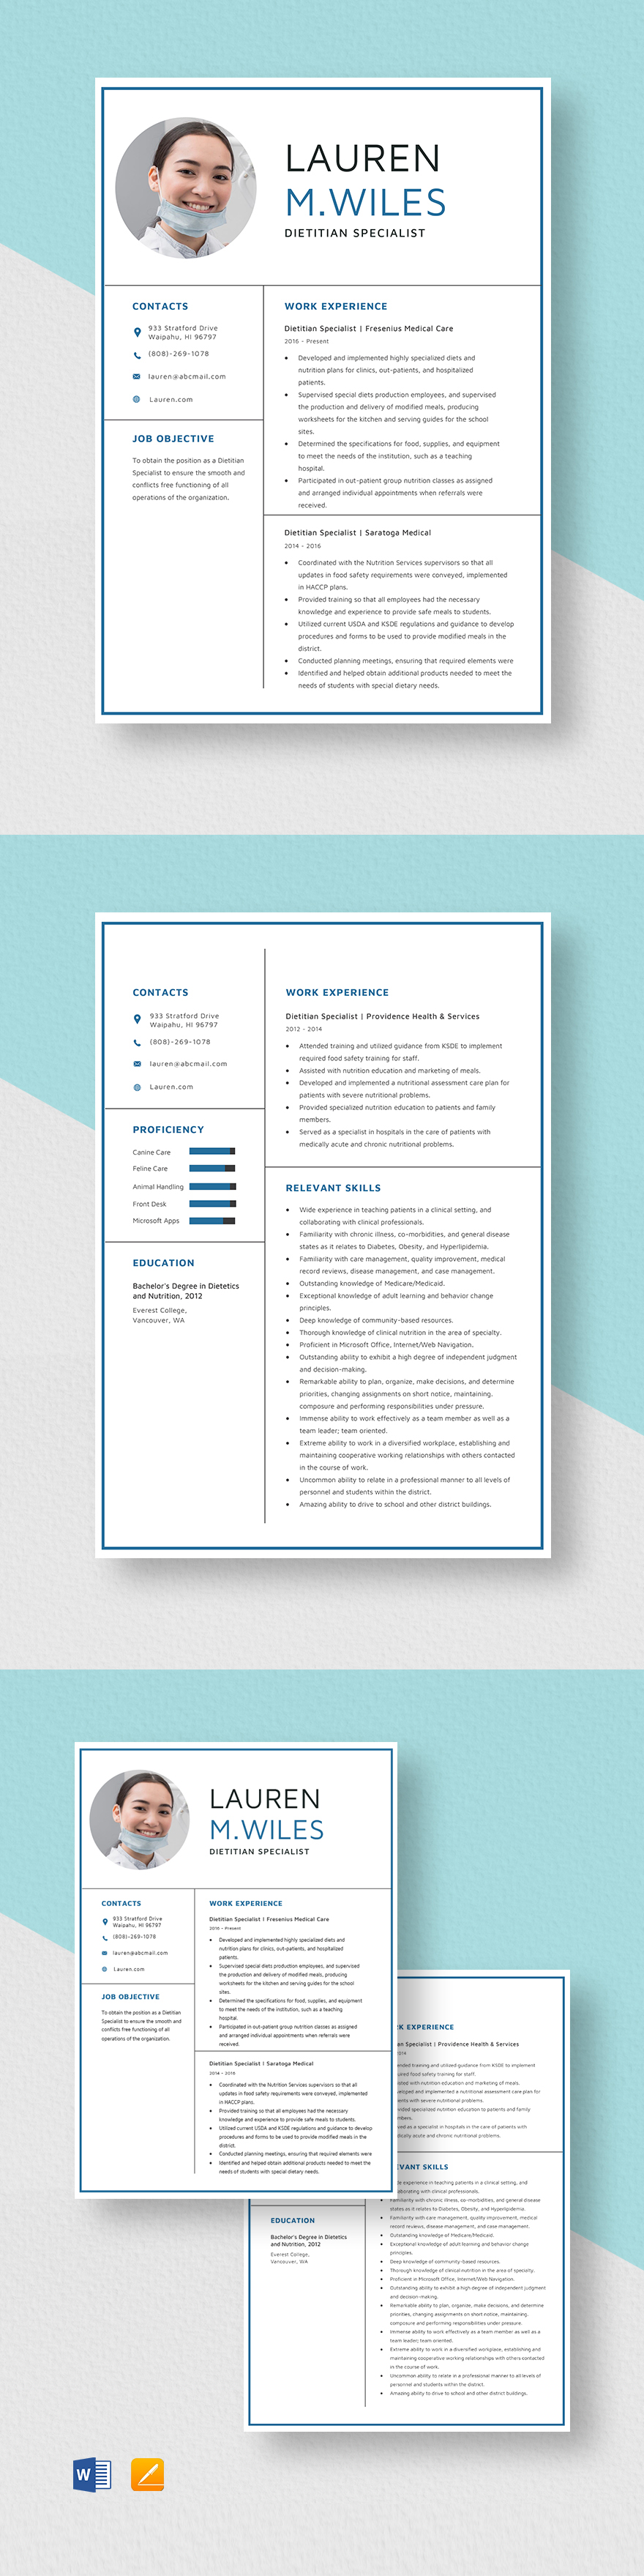 Free Dietitian Specialist Resume Template